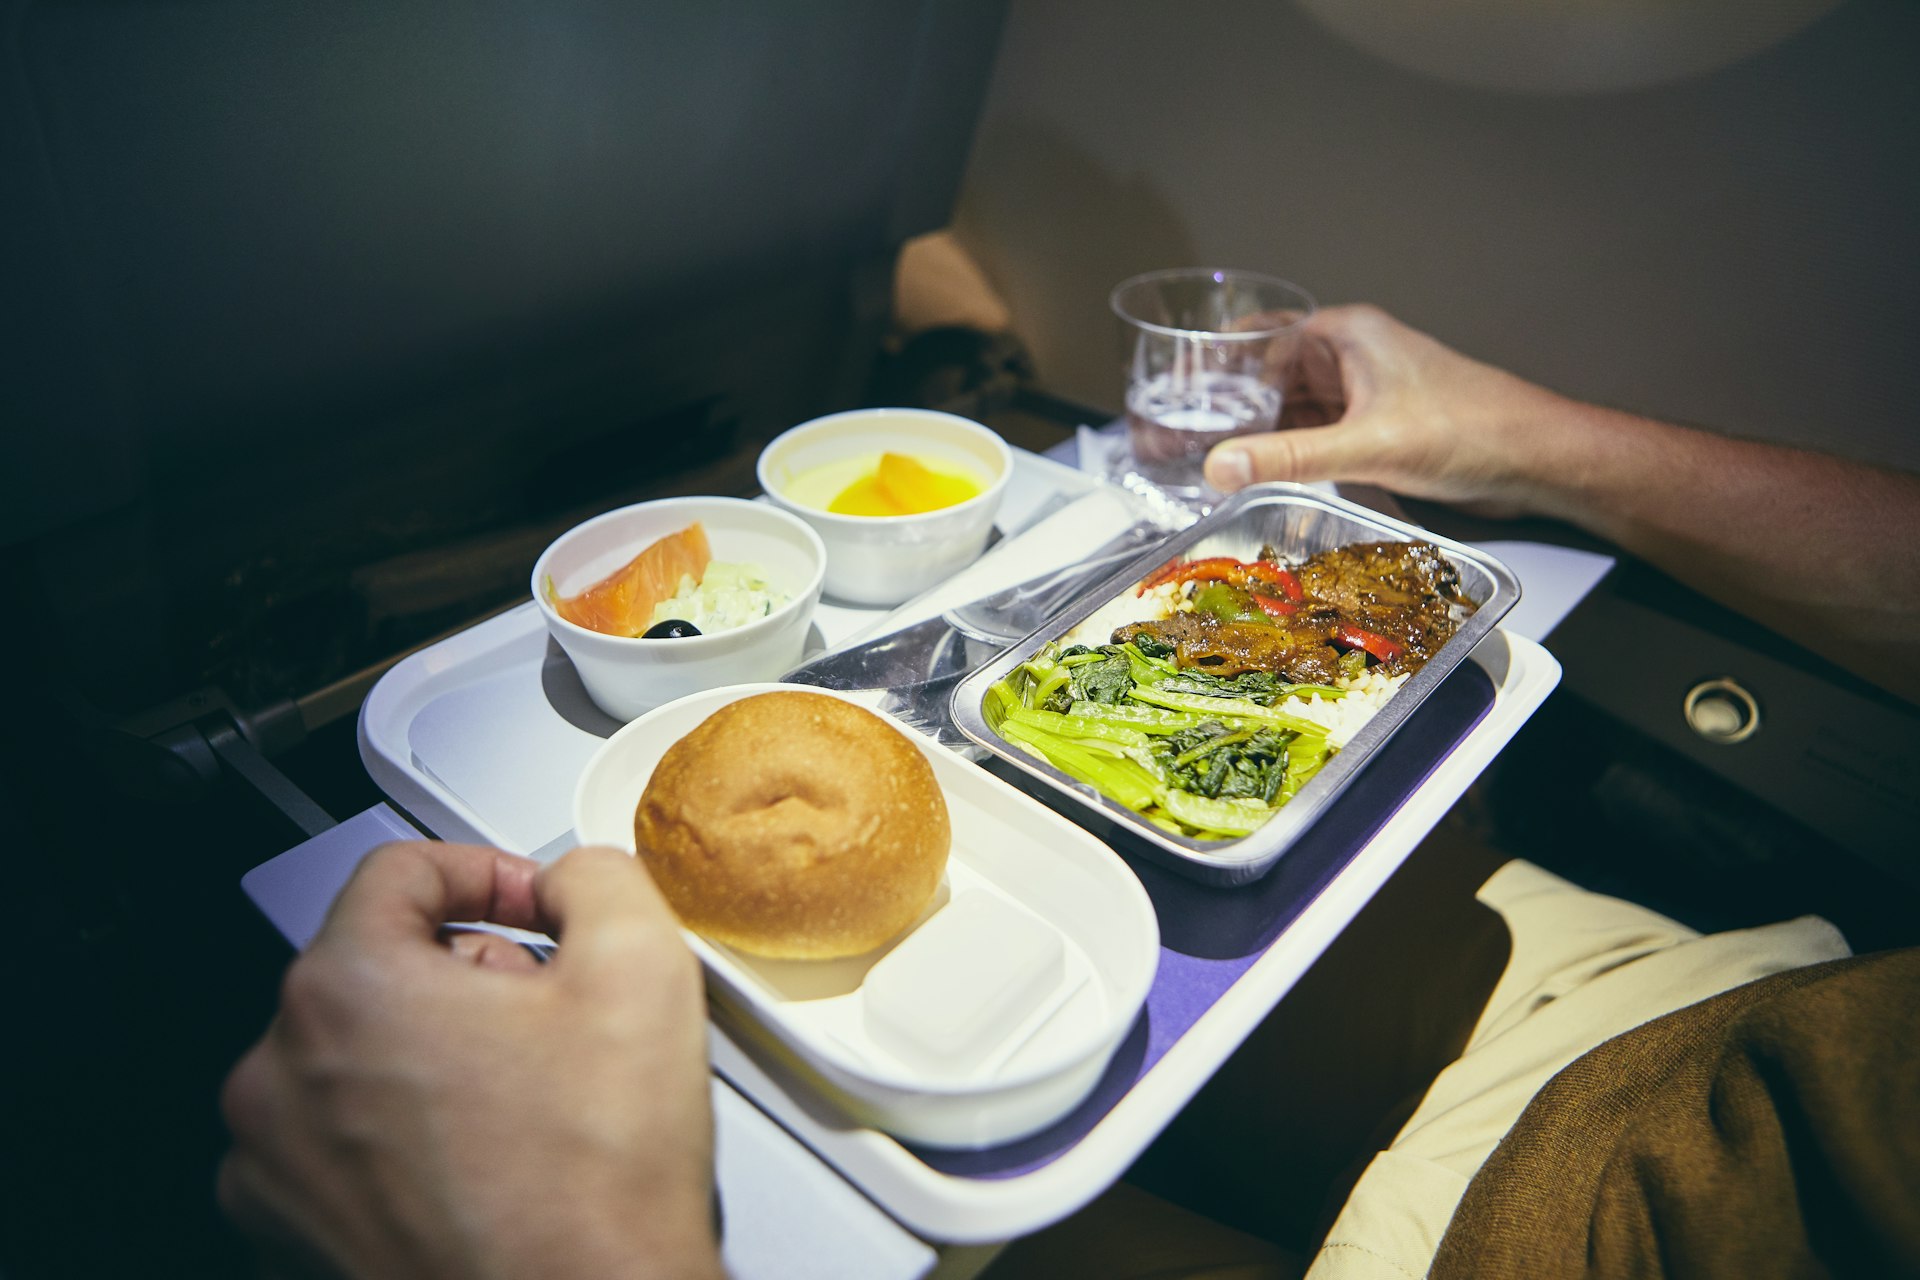 The best of what you can hope for when it comes to airplane food